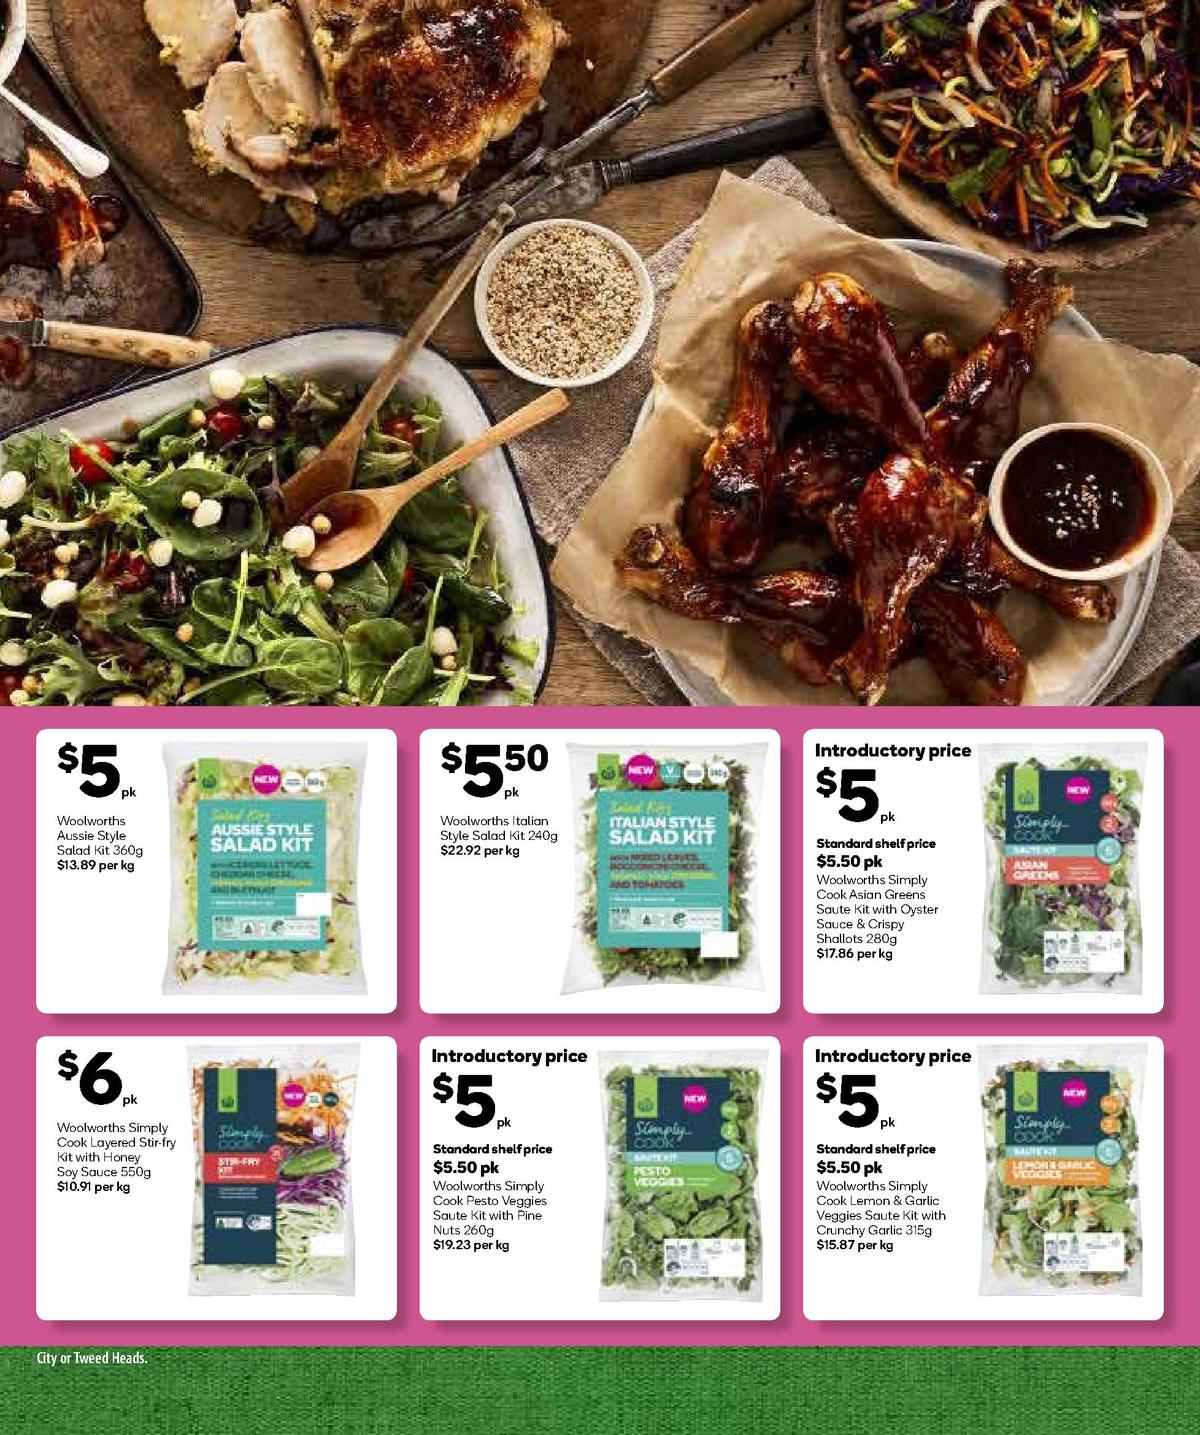 Woolworths NEW at Woolworths Catalogues from 26 June